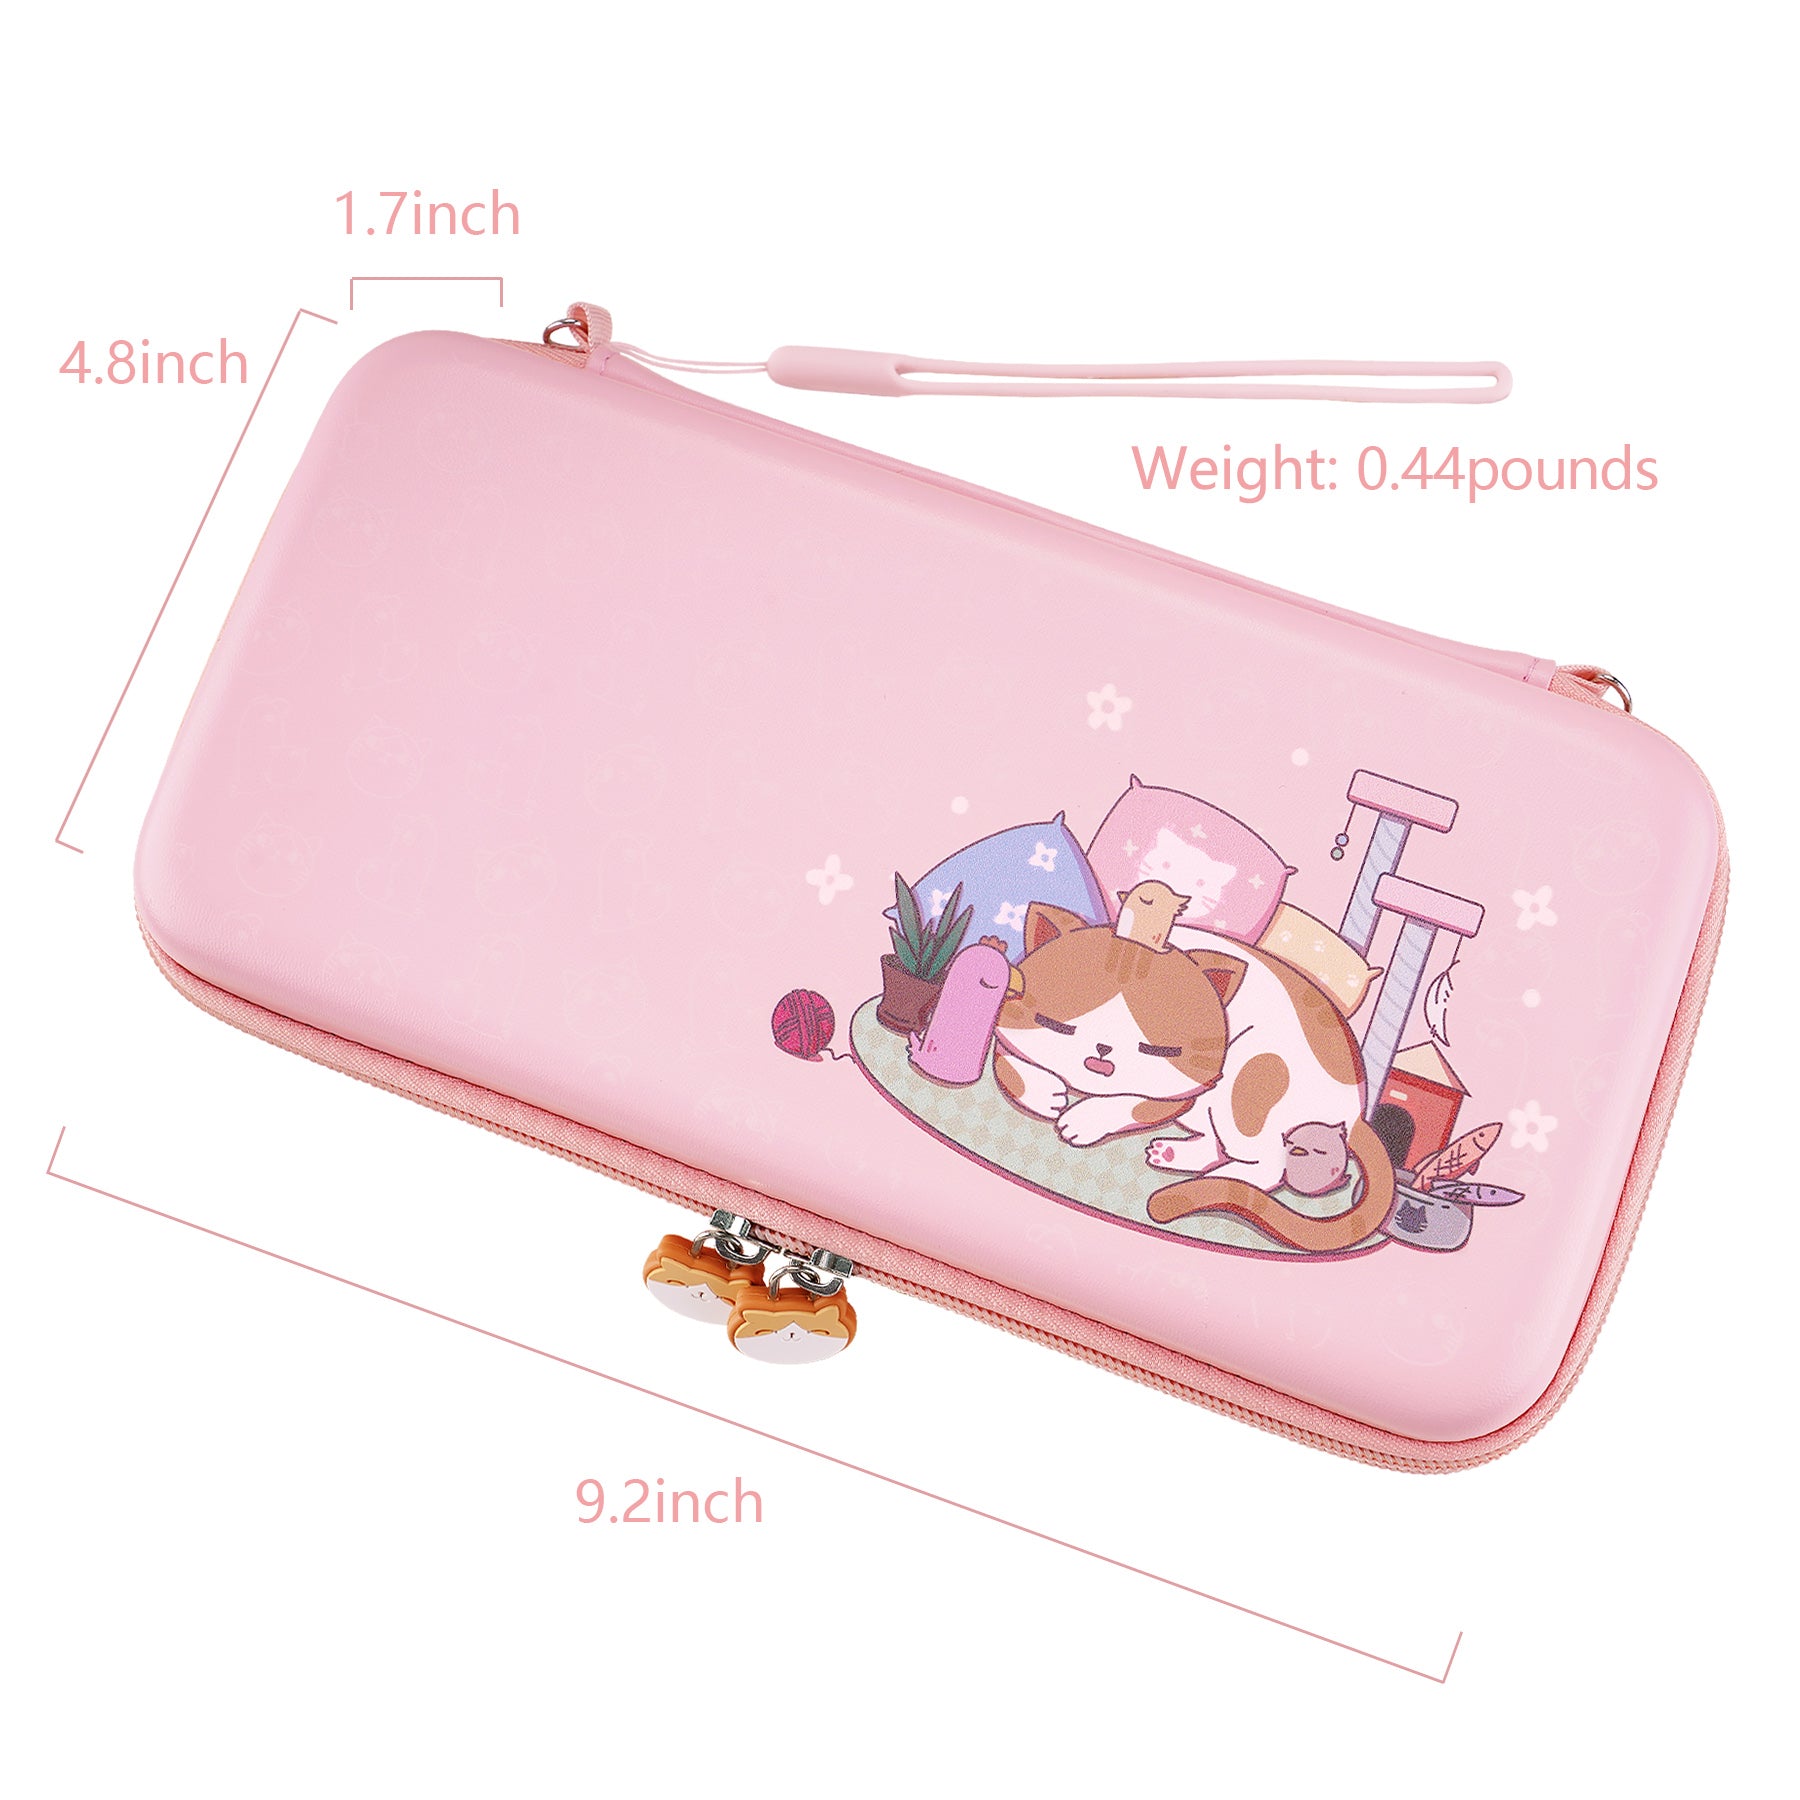 PlayVital Pink Switch Lite Travel Carrying Case, Portable Pouch, Soft Velvet Lining Storage Bag for NS Switch Lite with Thumb Grips 8 Game Cards Slots Inner Pocket - Kitten & Chicken - LTW002 PlayVital